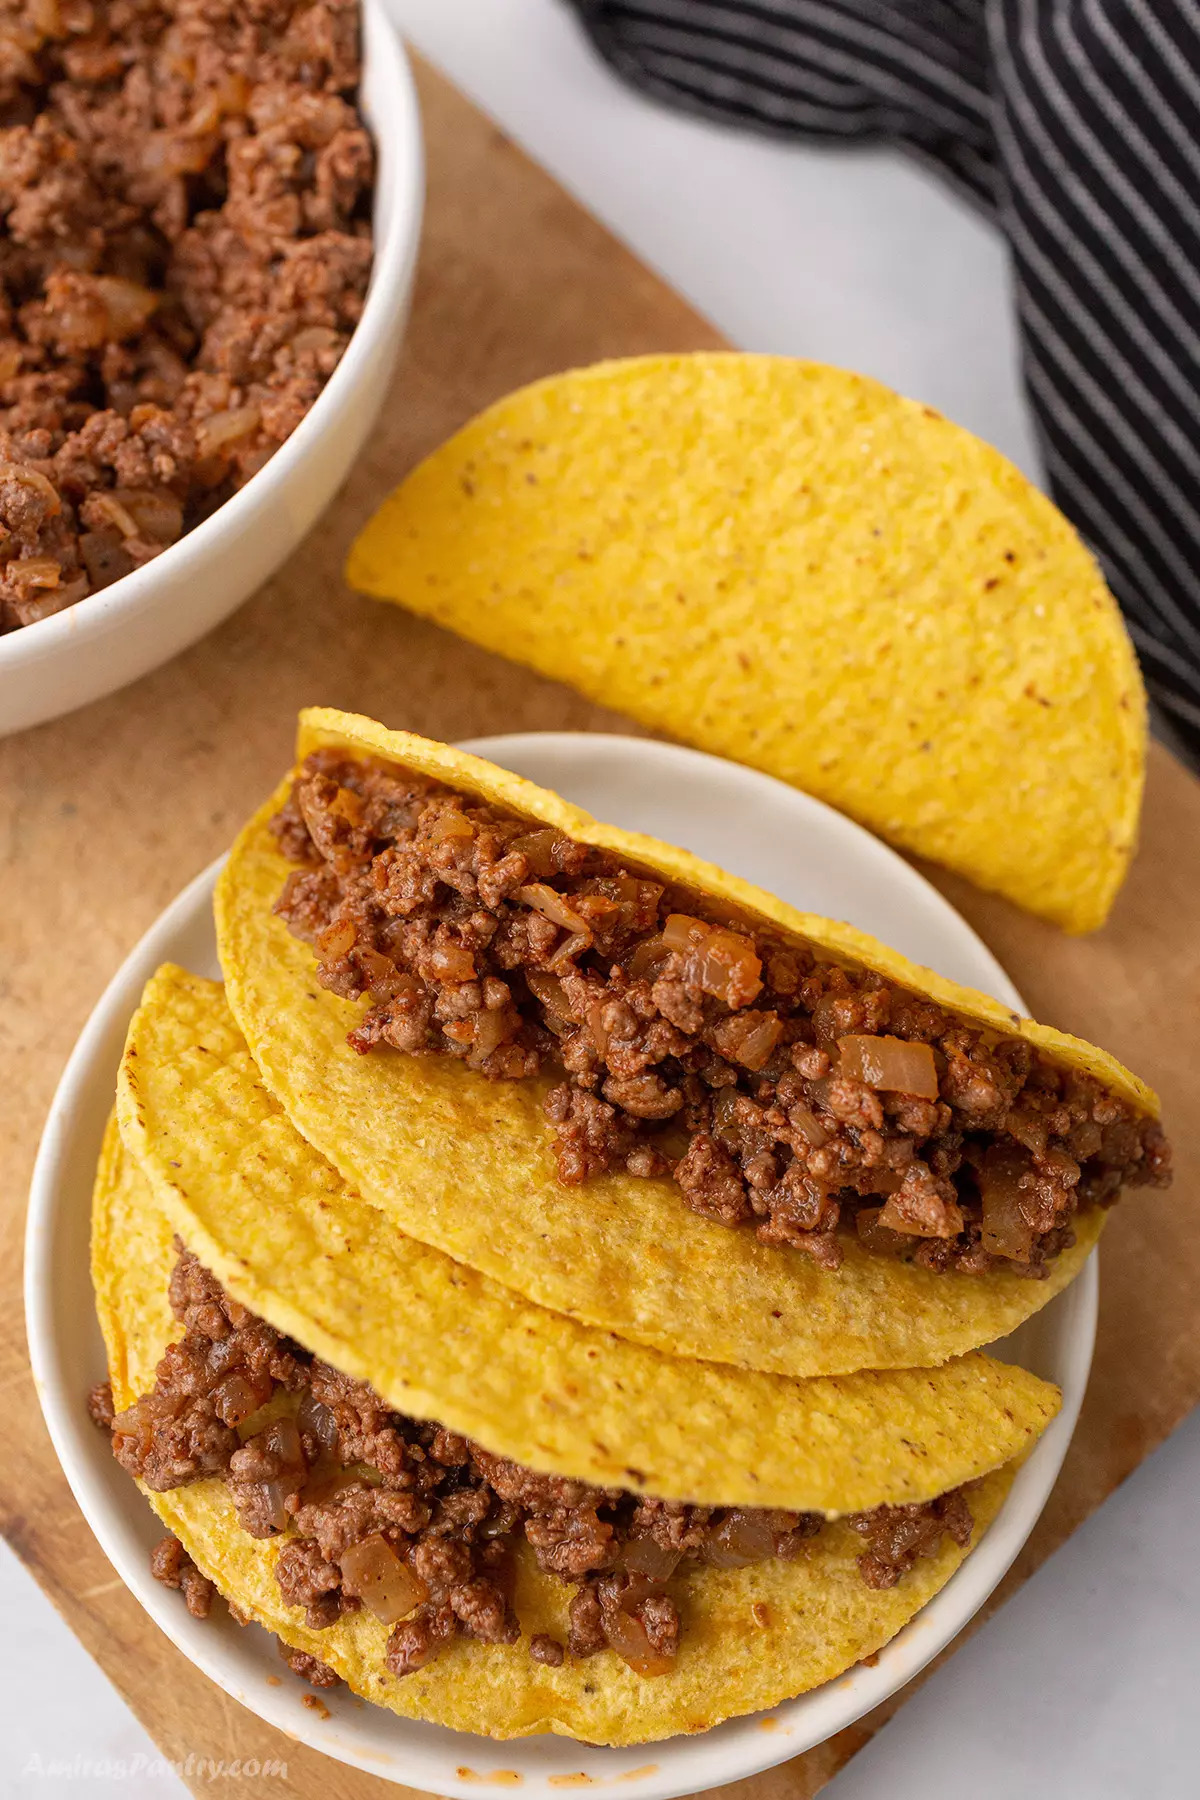 Taco shells with ground beef mixture.